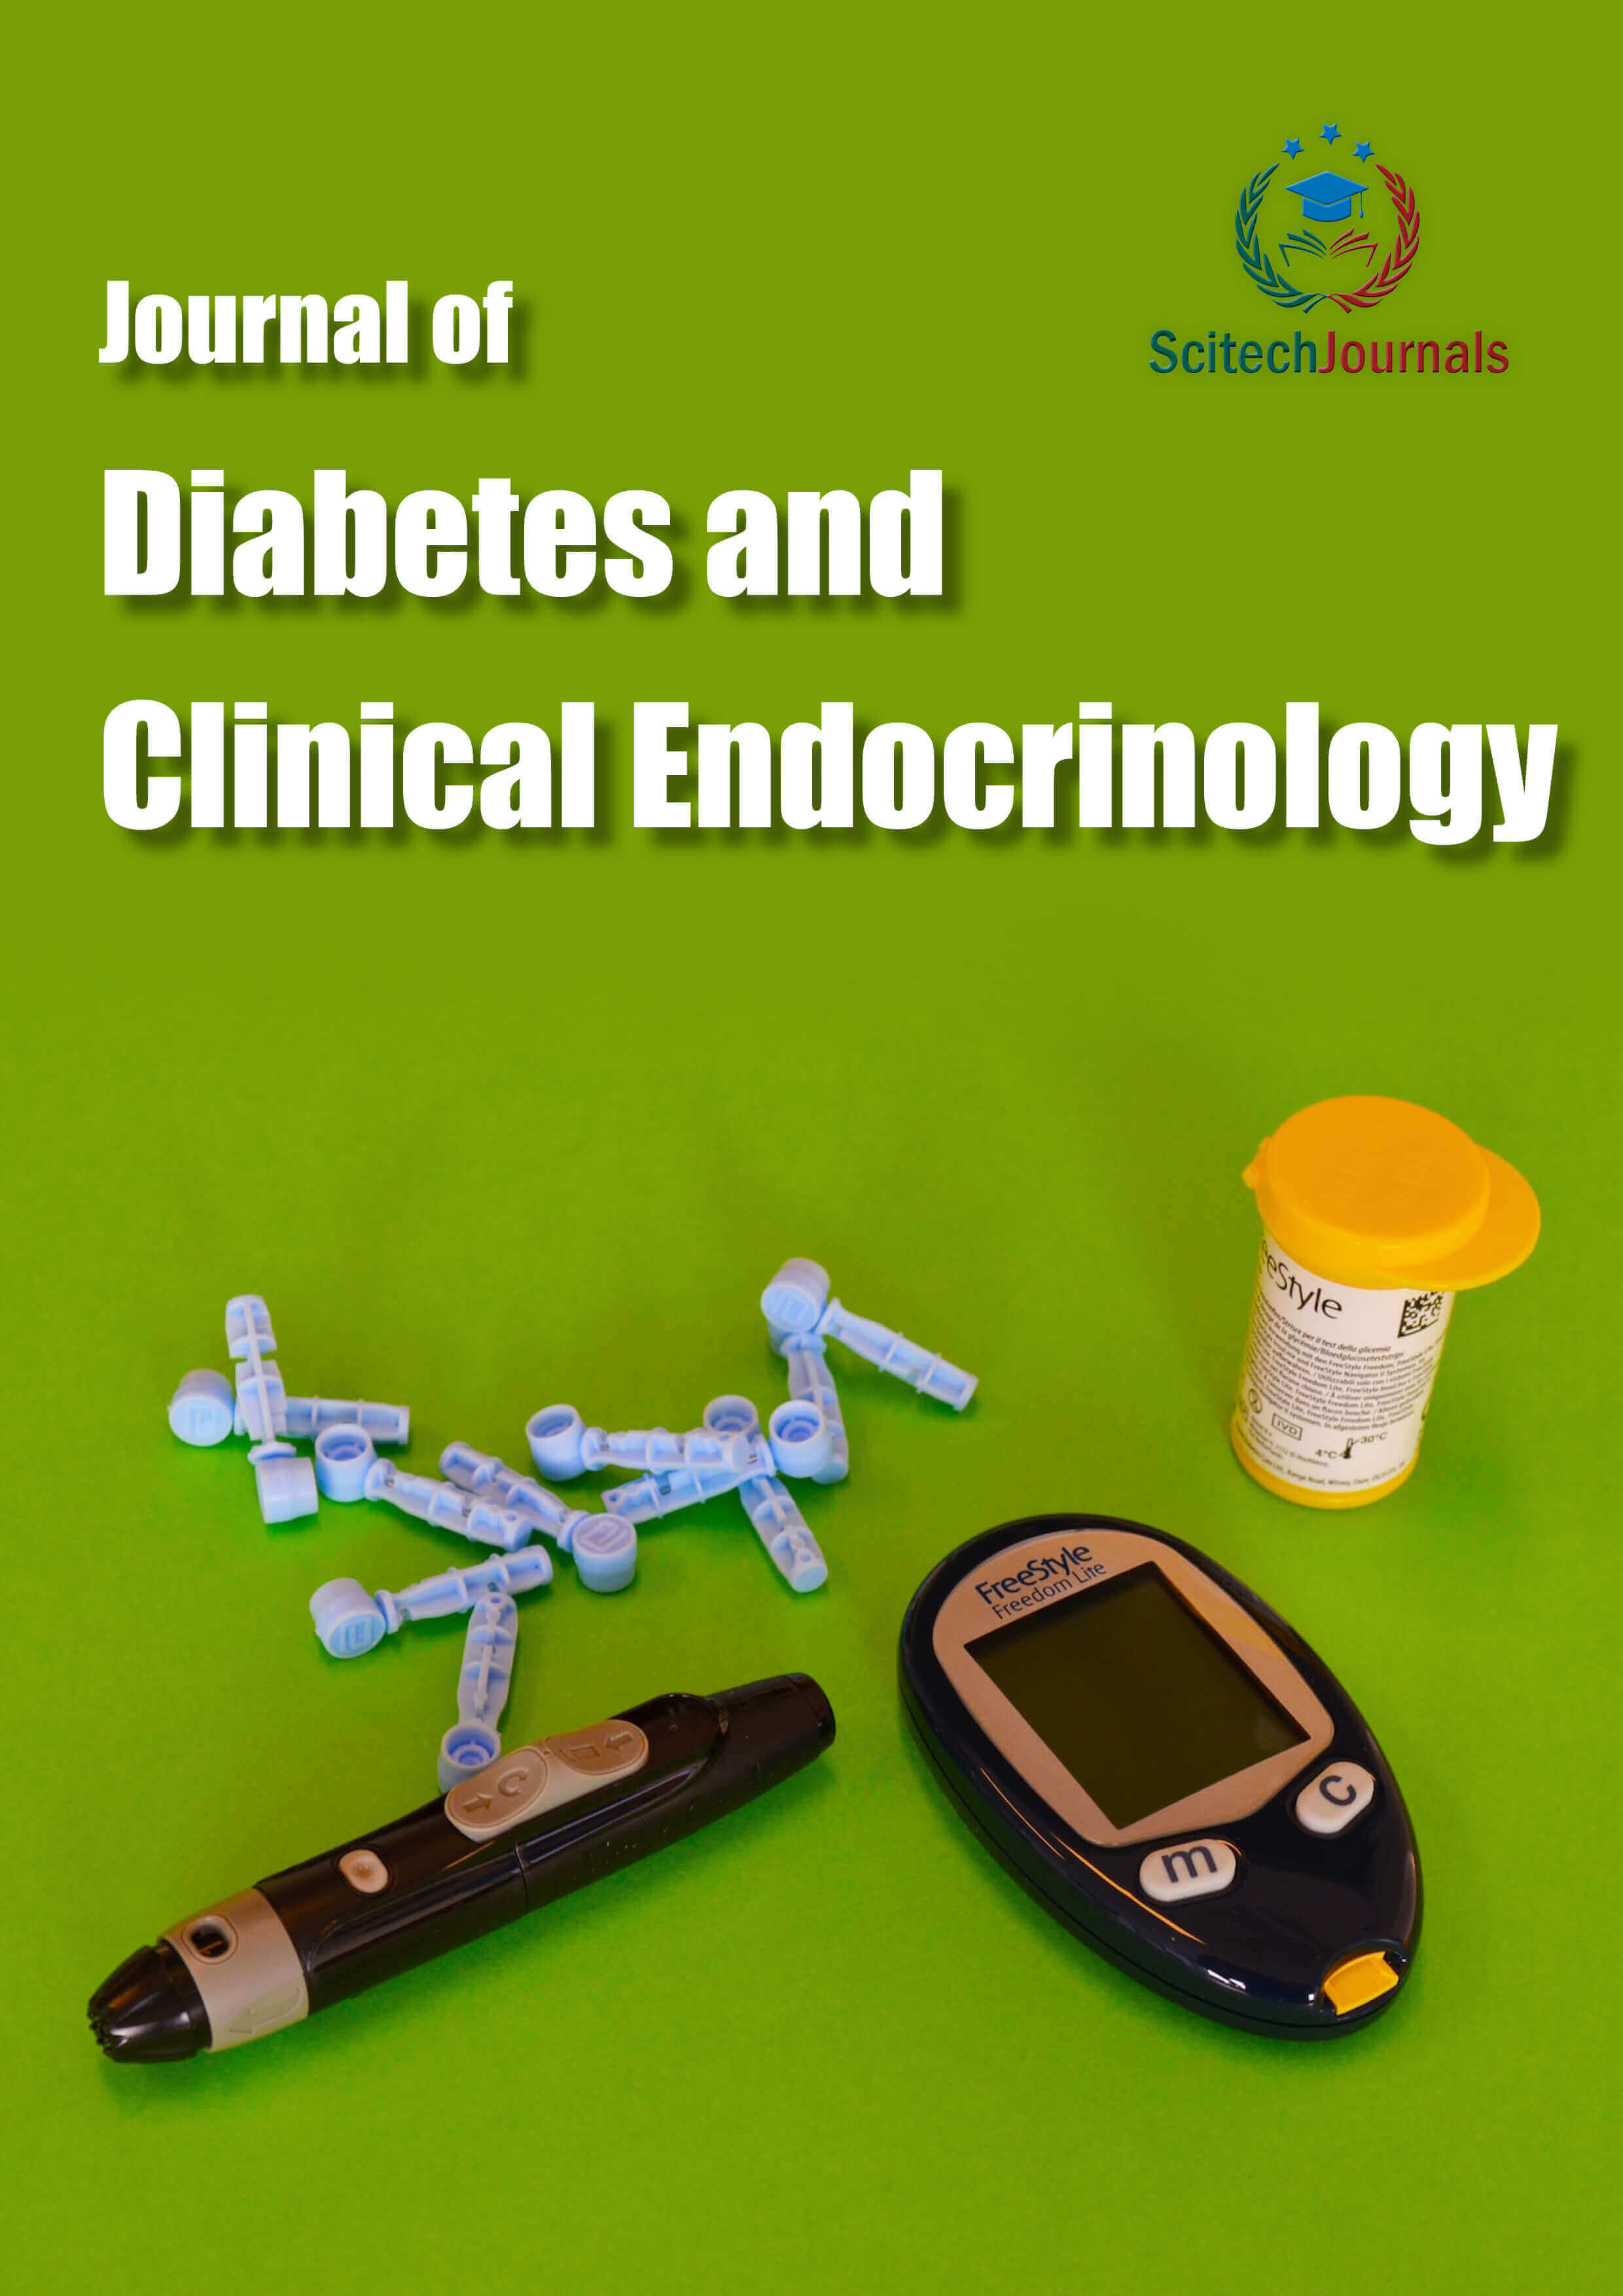 Journal of Diabetes and Clinical Endocrinology